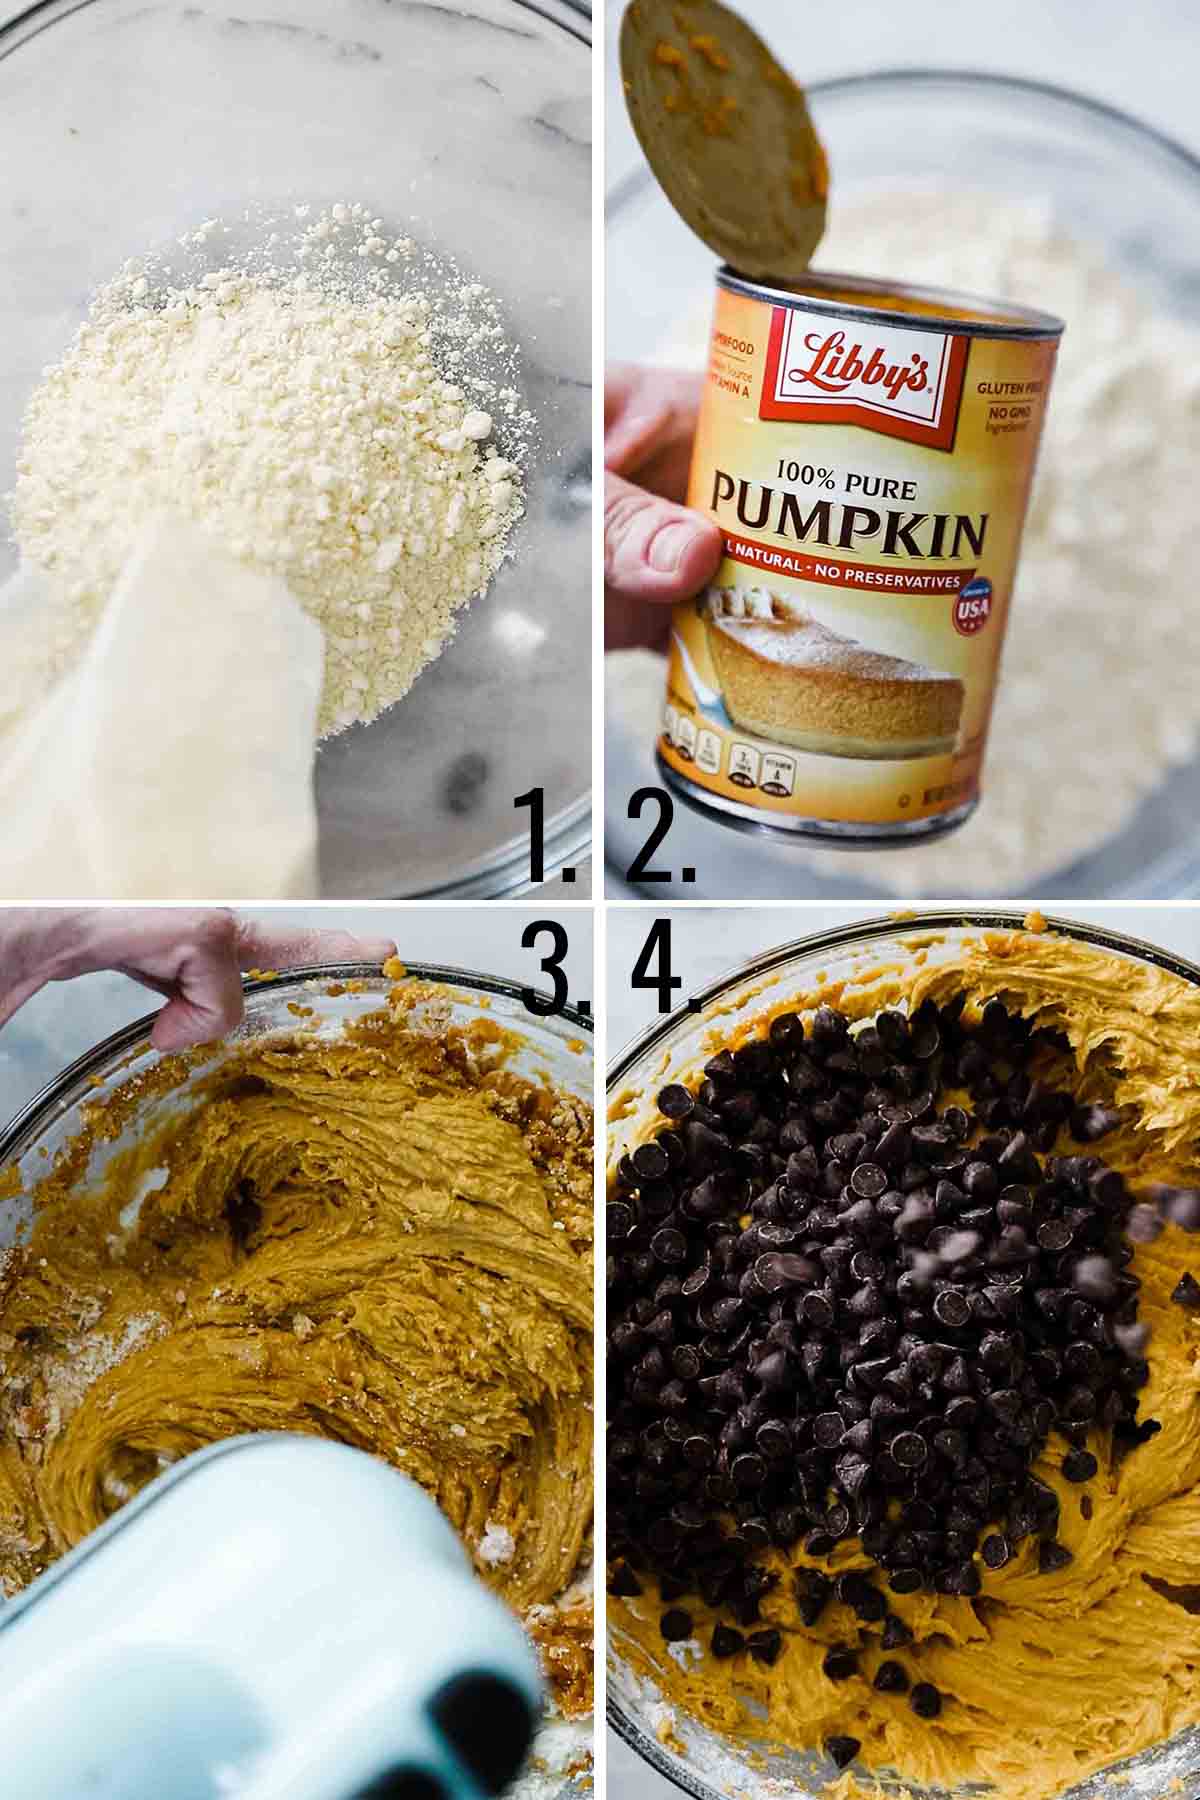 Cake mix and canned pumpkin being blended together in a mixing bowl with chocolate chips.